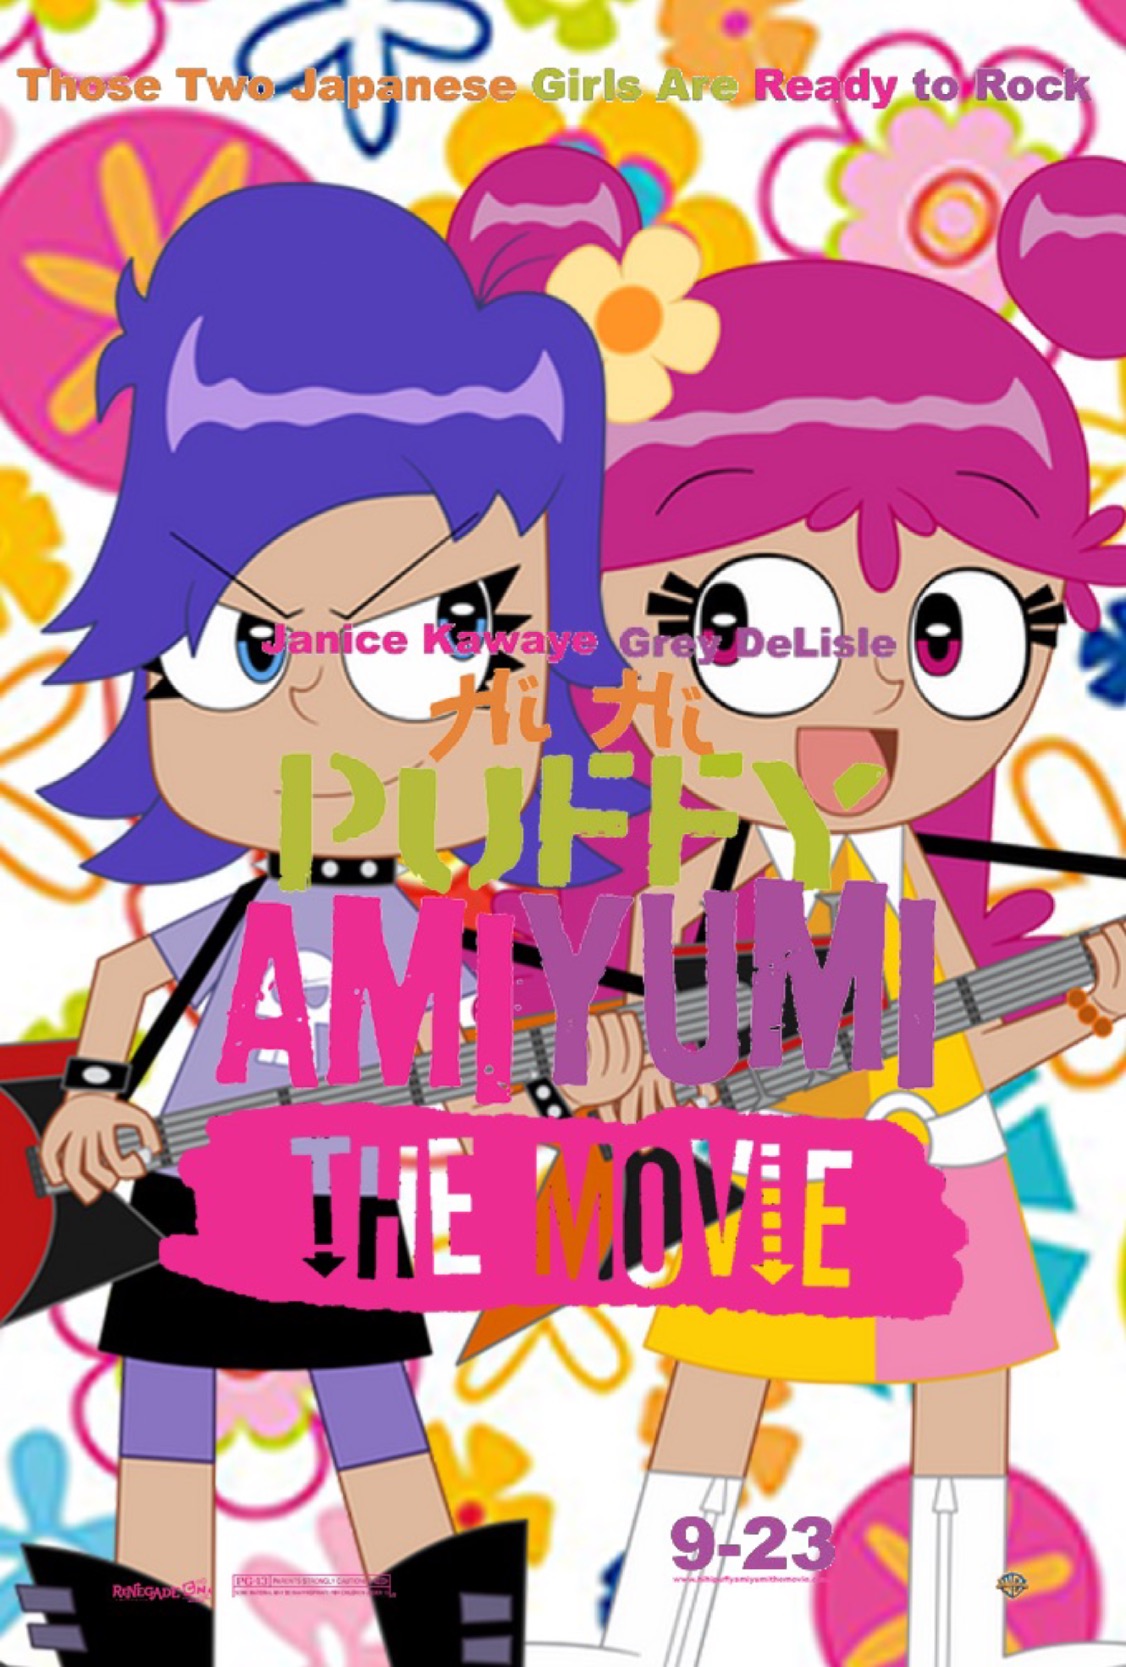 Hi hi Puffy AmiYumi. Together forever : Mooney, E. S : Free Download,  Borrow, and Streaming : Internet Archive